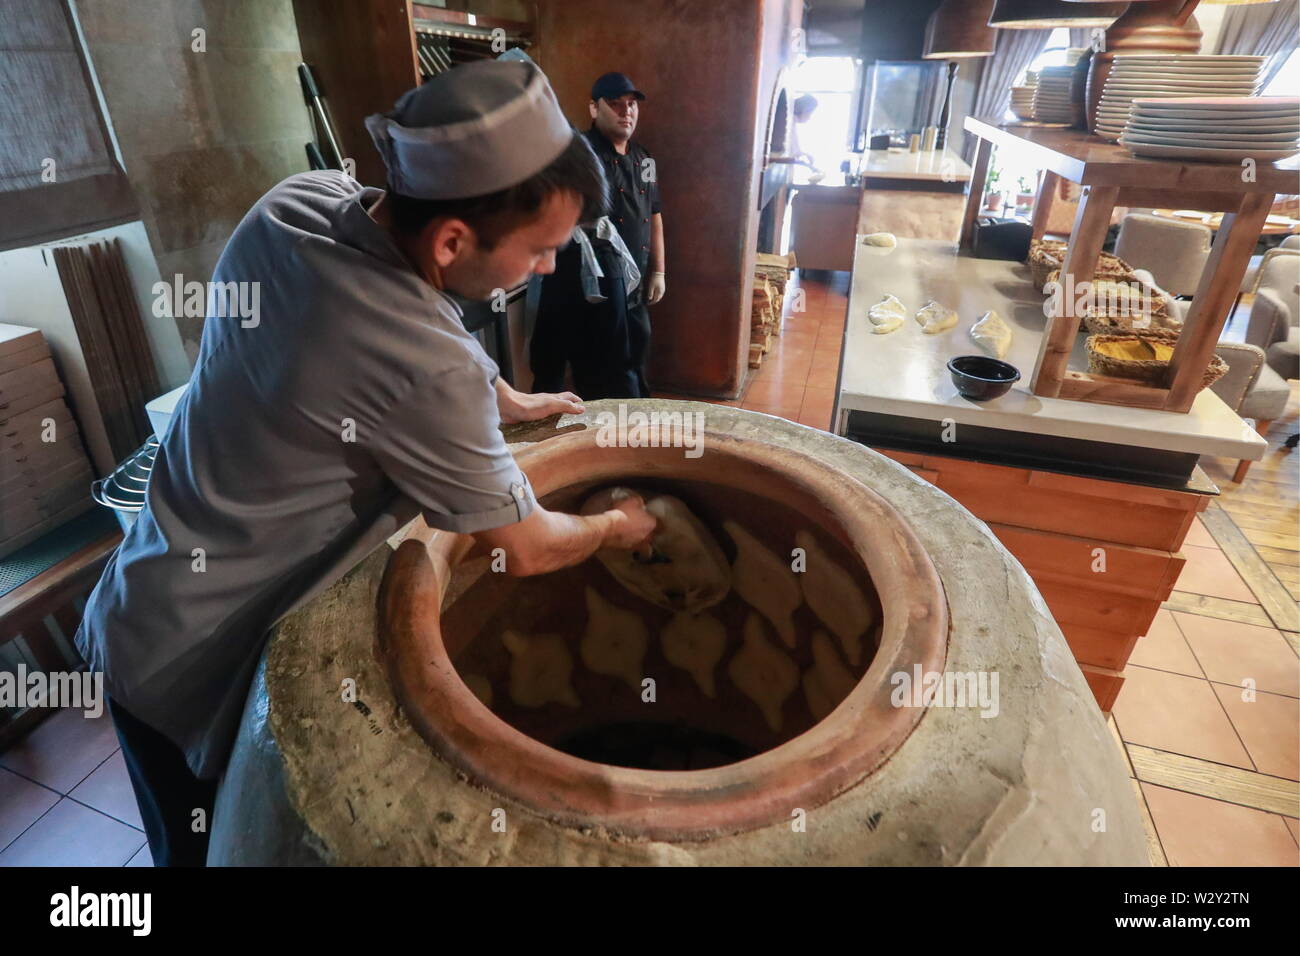 Tandoor Oven High Resolution Stock Photography and Images - Alamy